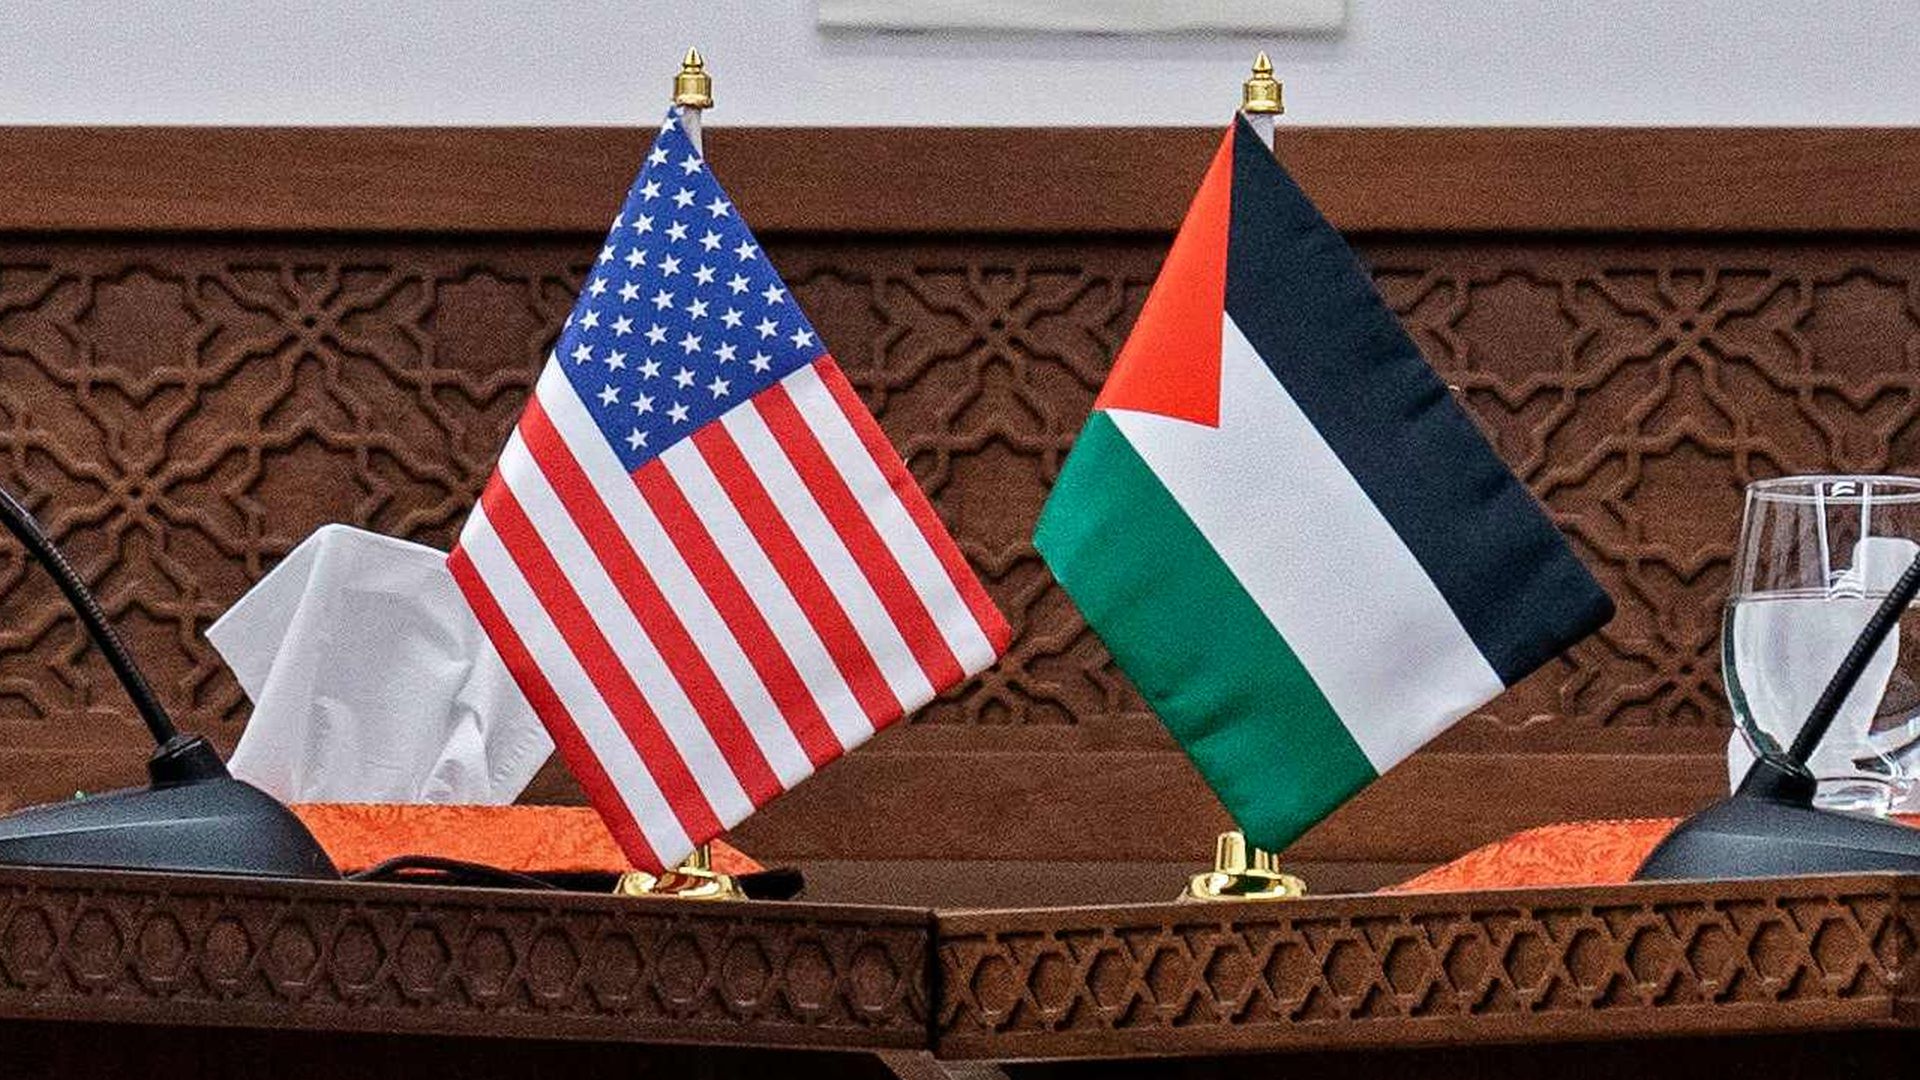 Palestinian and U.S. flags